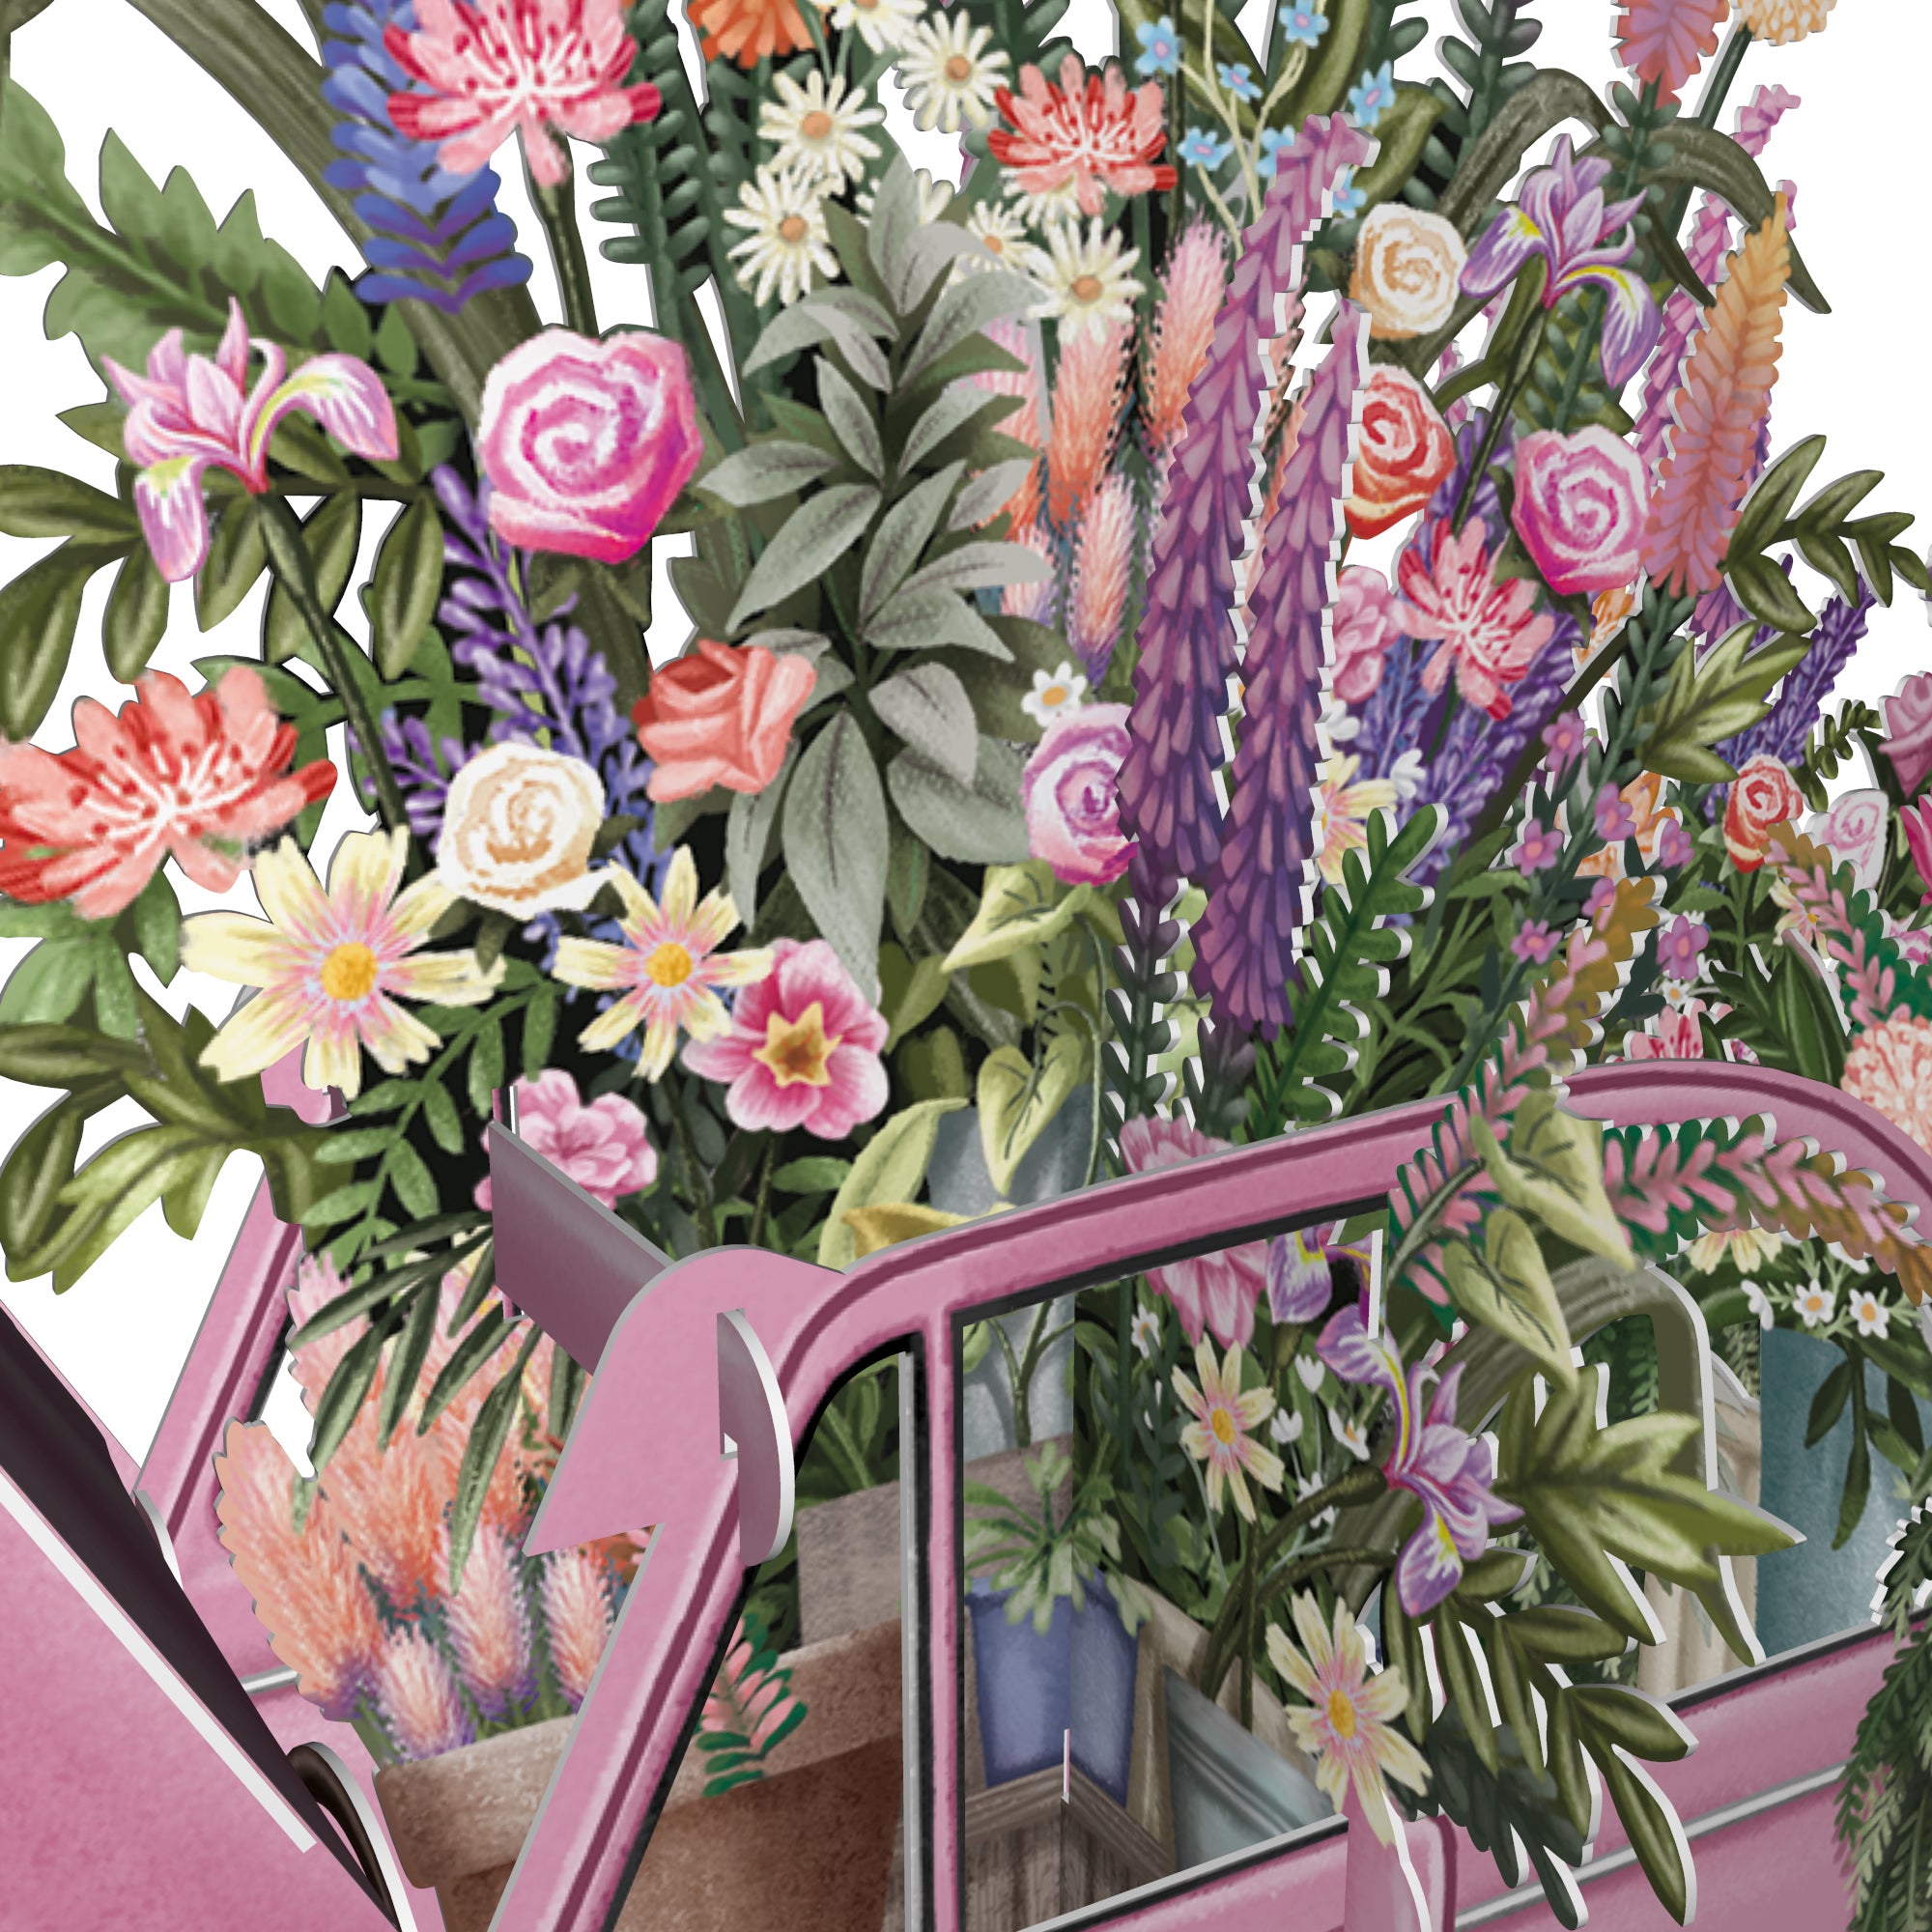 &quot;The Pink Flower Car&quot; - 3D Pop Up Greetings Card